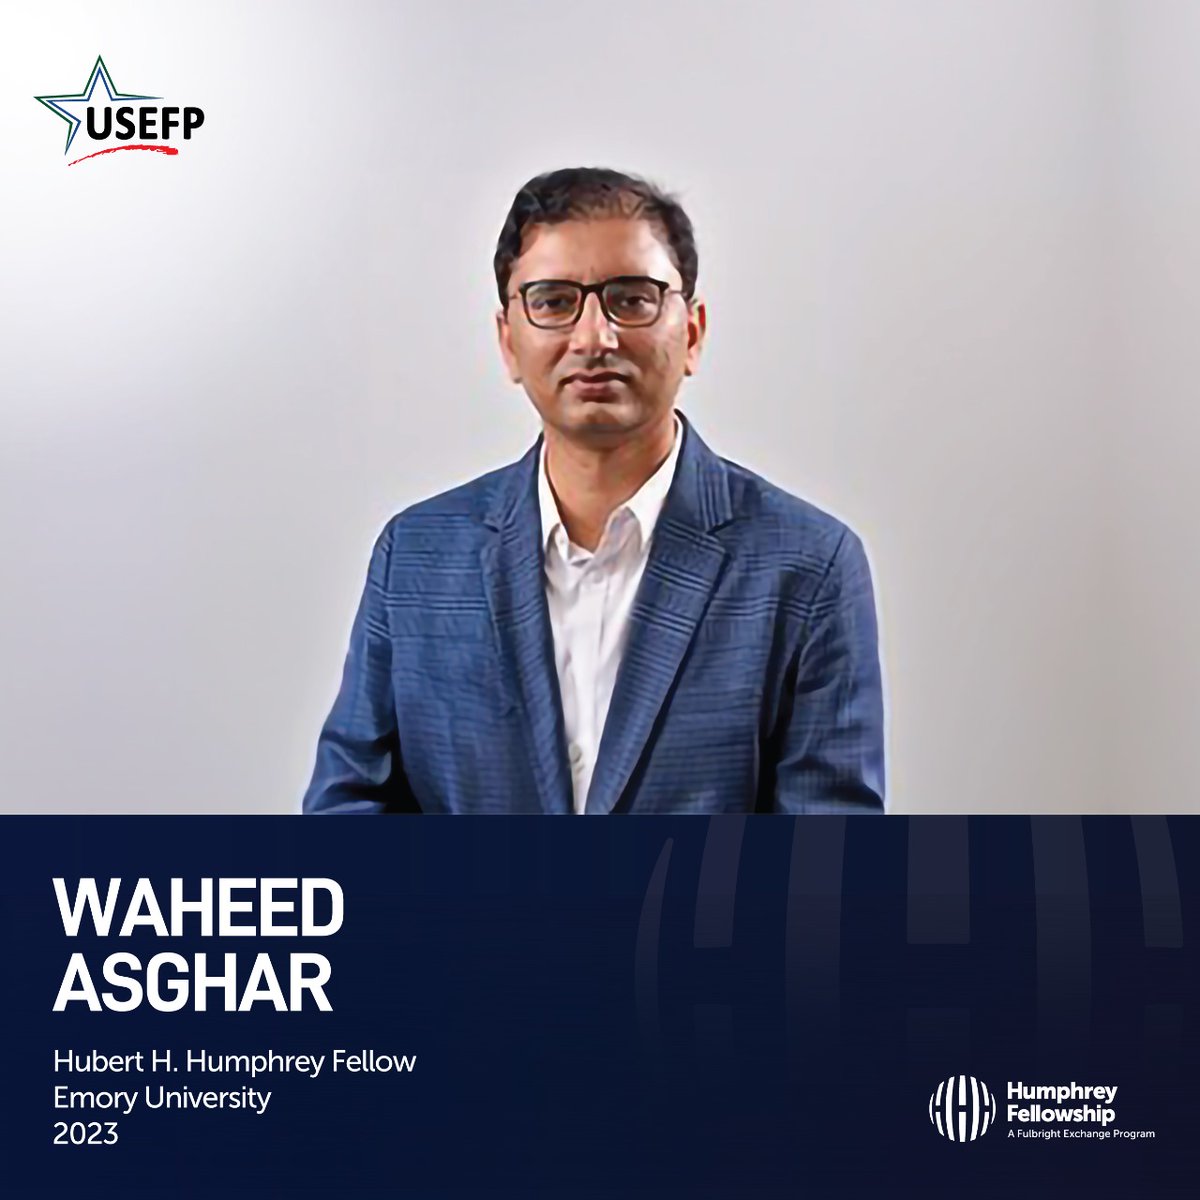 #Humphrey Fellow Waheed Asghar has a background in health and administration, and is utilizing his time at Emory University to learn best practices in public health policy and management. One of his main goals is to address the major health challenge in Pakistan – polio. #USEFP